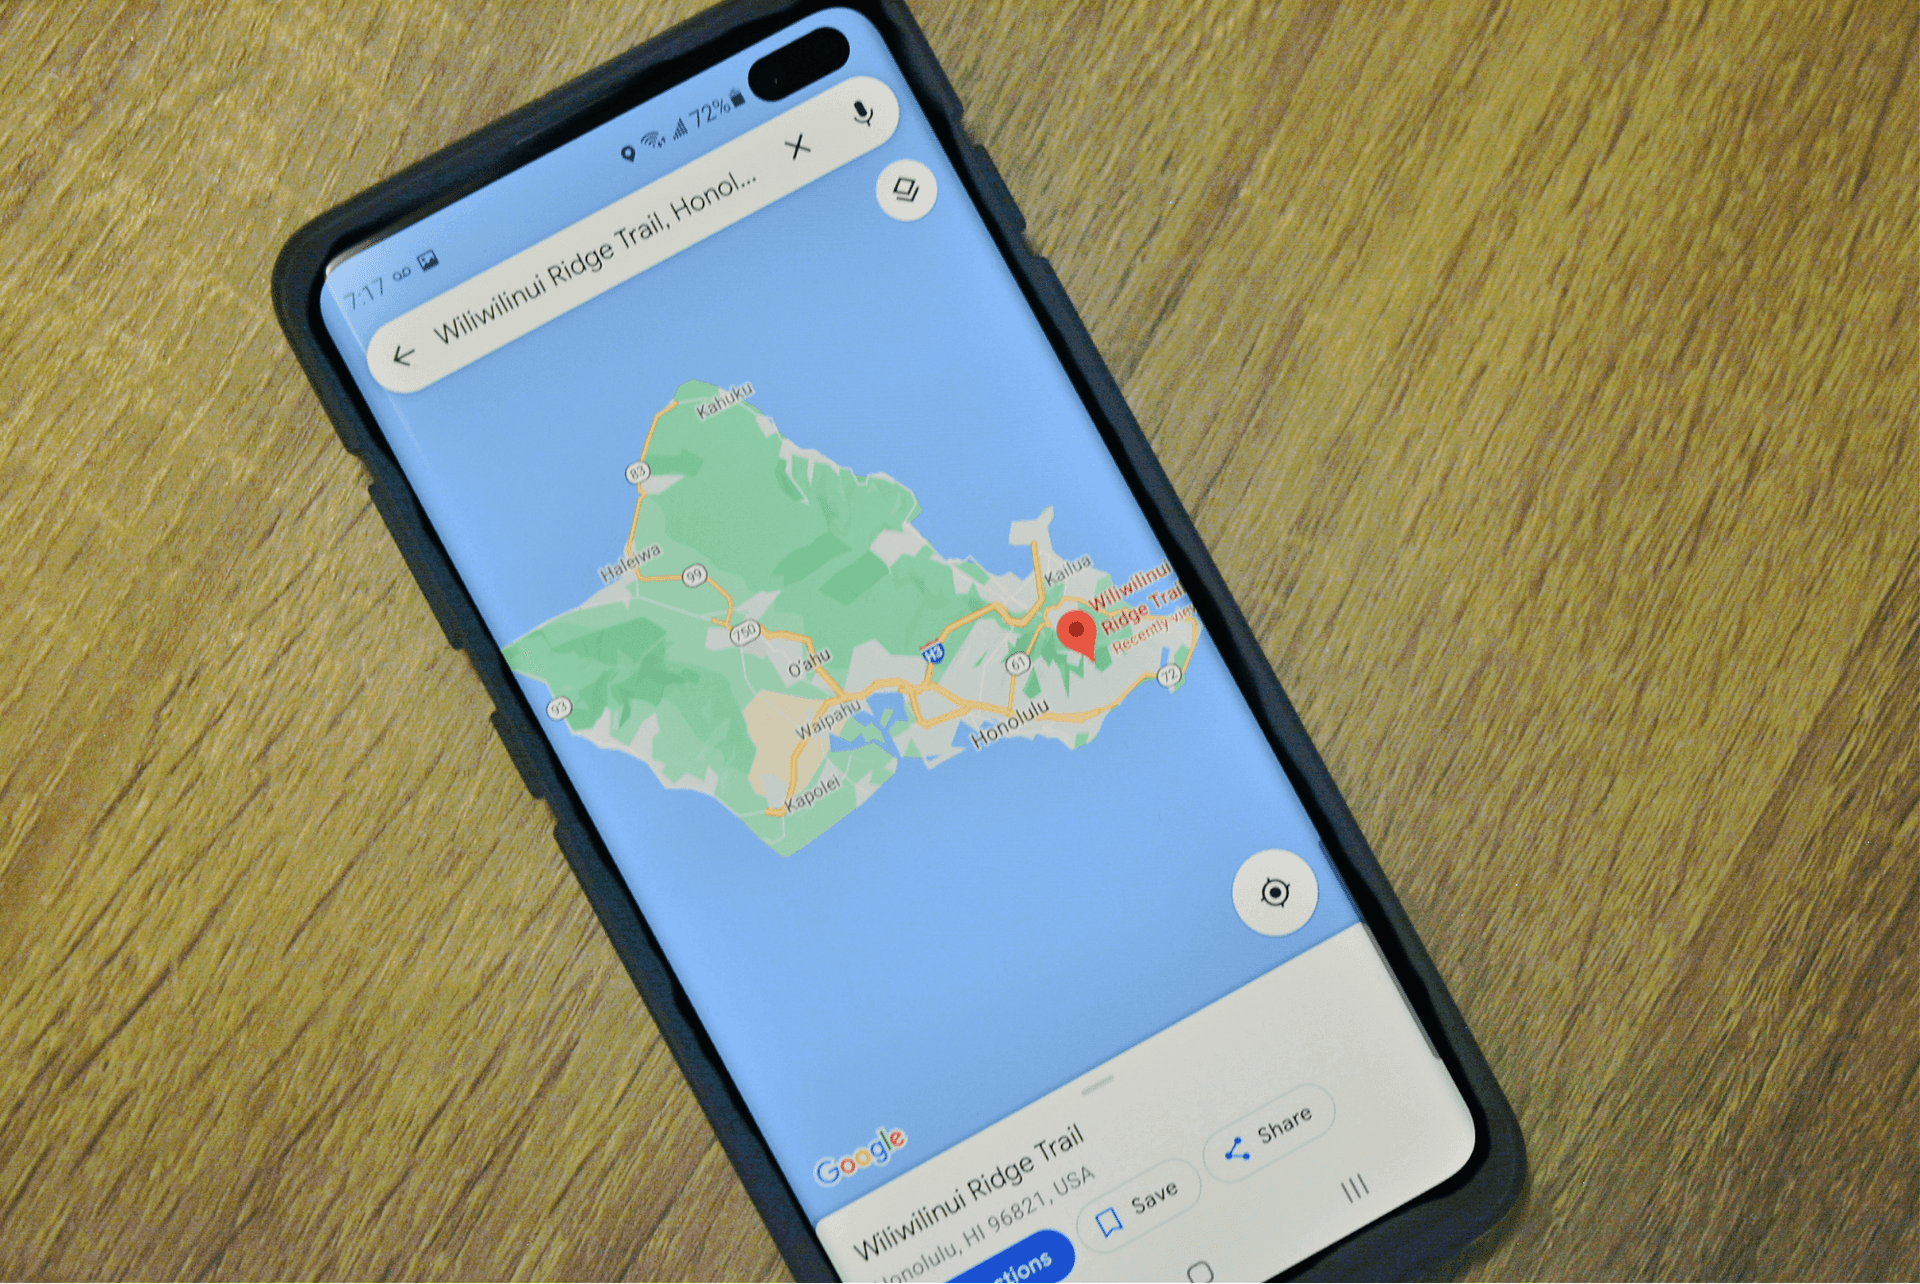 Download the hike route on your phone and save it for offline use. That way if you go out of service, you will still be able to see the trail on your phone and where you are along the trail.